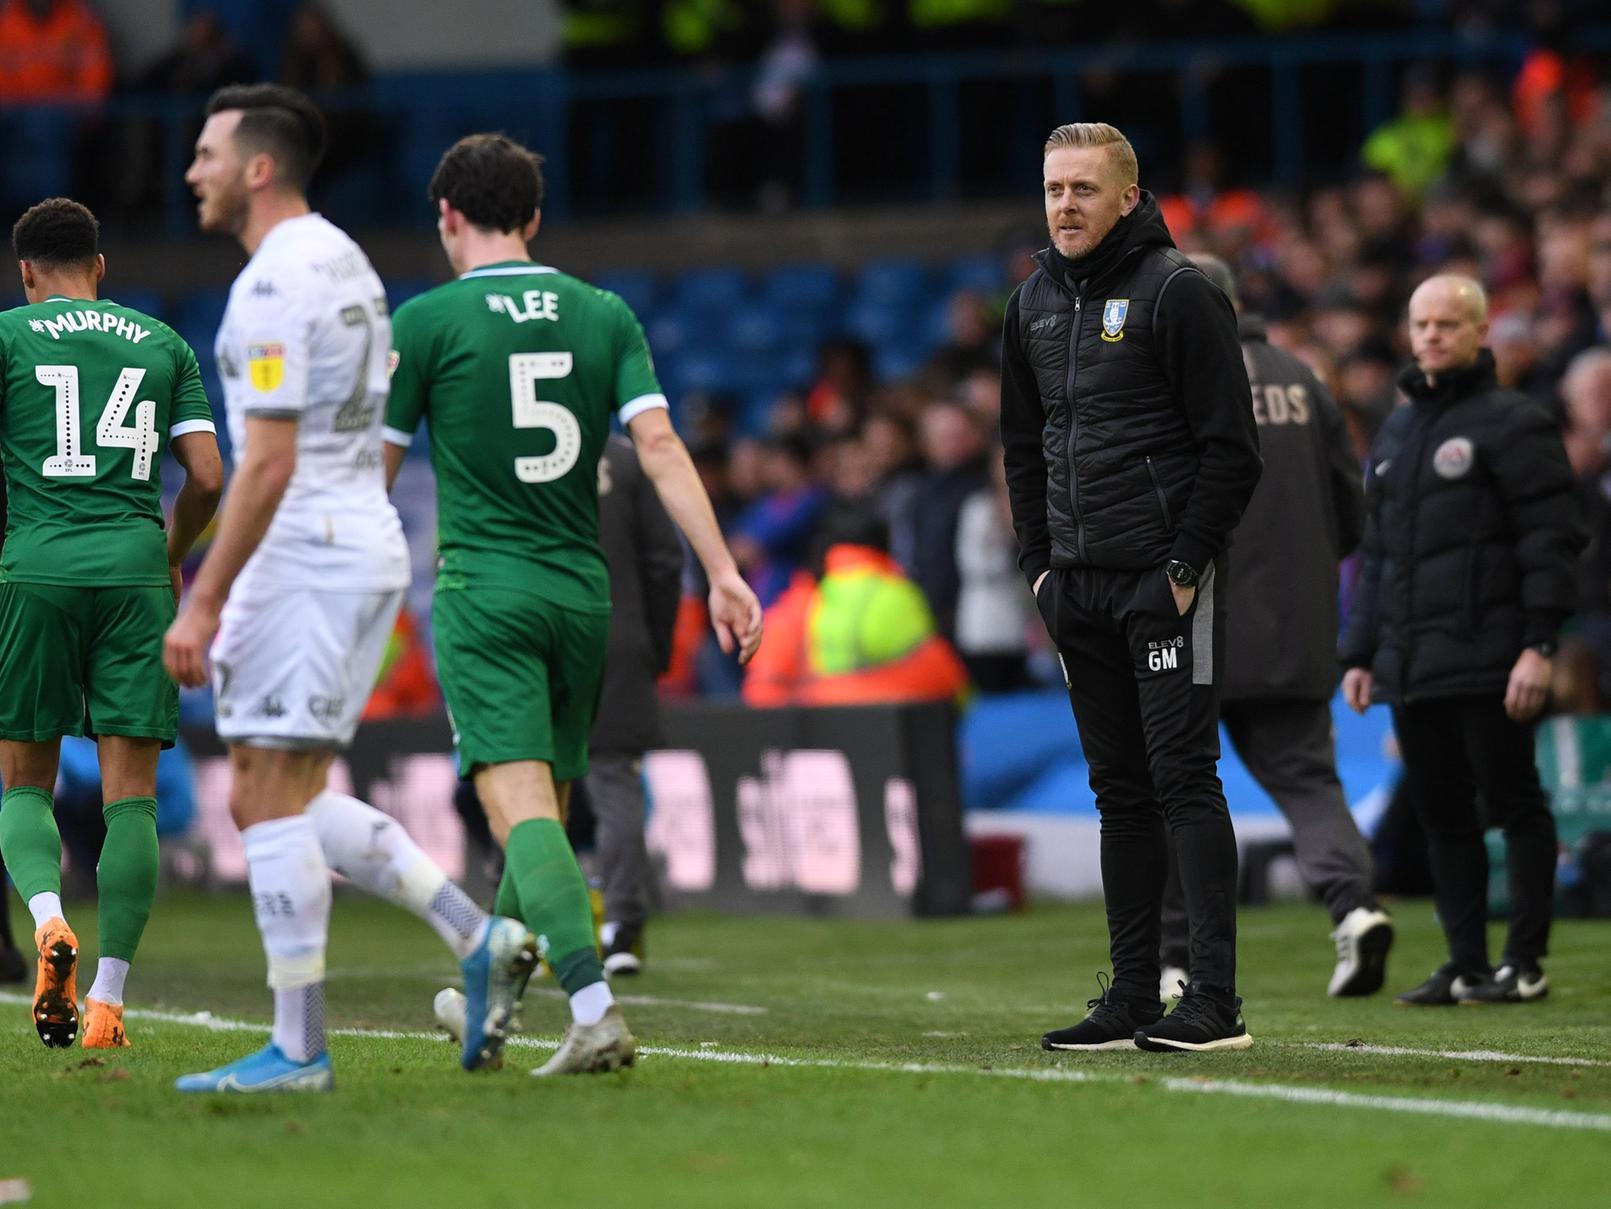 The former Leeds manager won at his old clubs stomping ground and stay undefeated against Marcelo Bielsa. However, he played down the three points, believing his side arent quite where Leeds are.